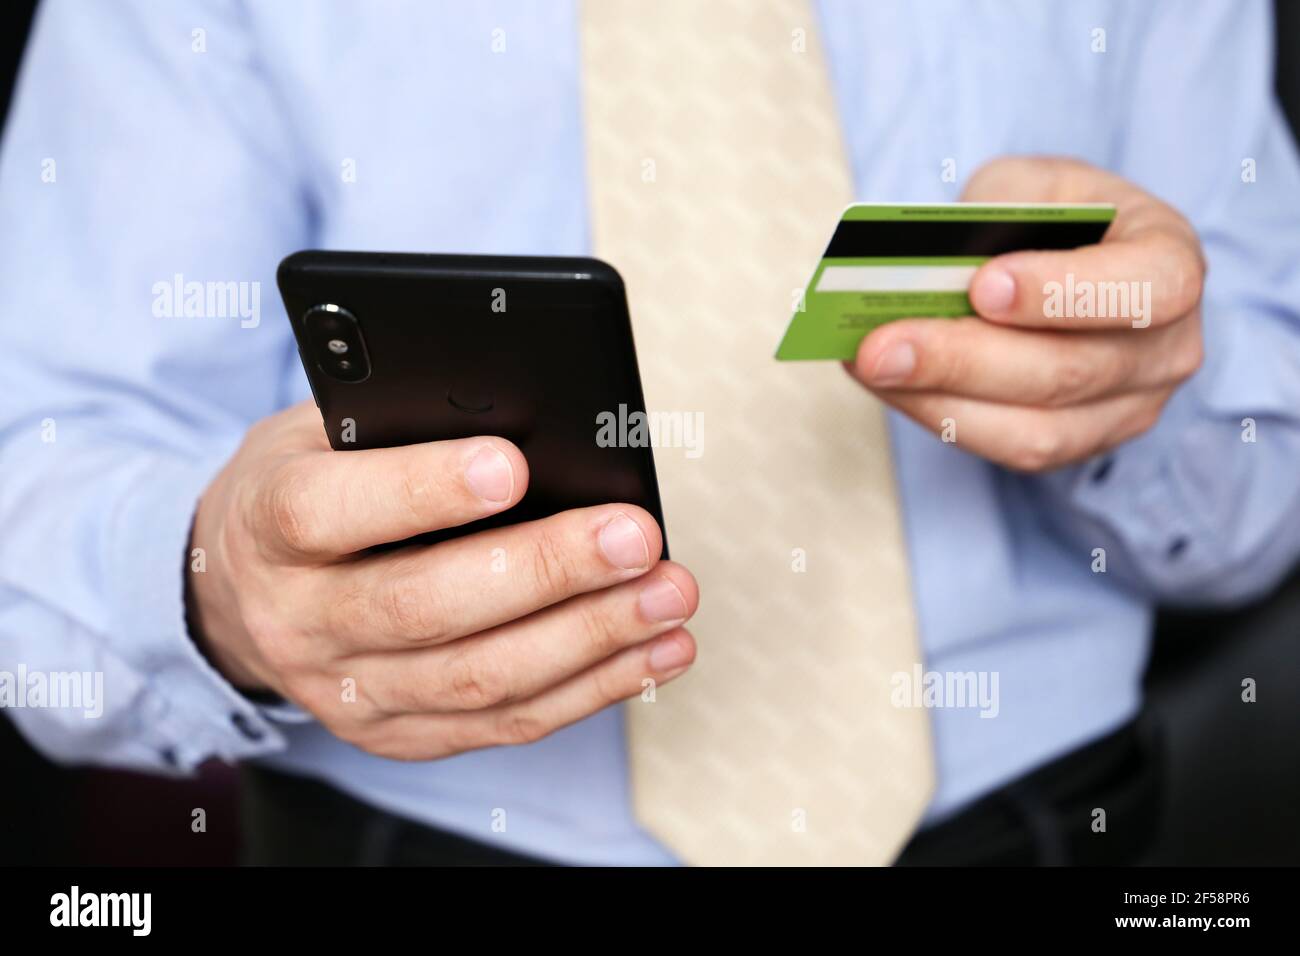 Man in office clothes holding credit bank card and smartphone in hands. Concept of online shopping and payment, financial transaction Stock Photo